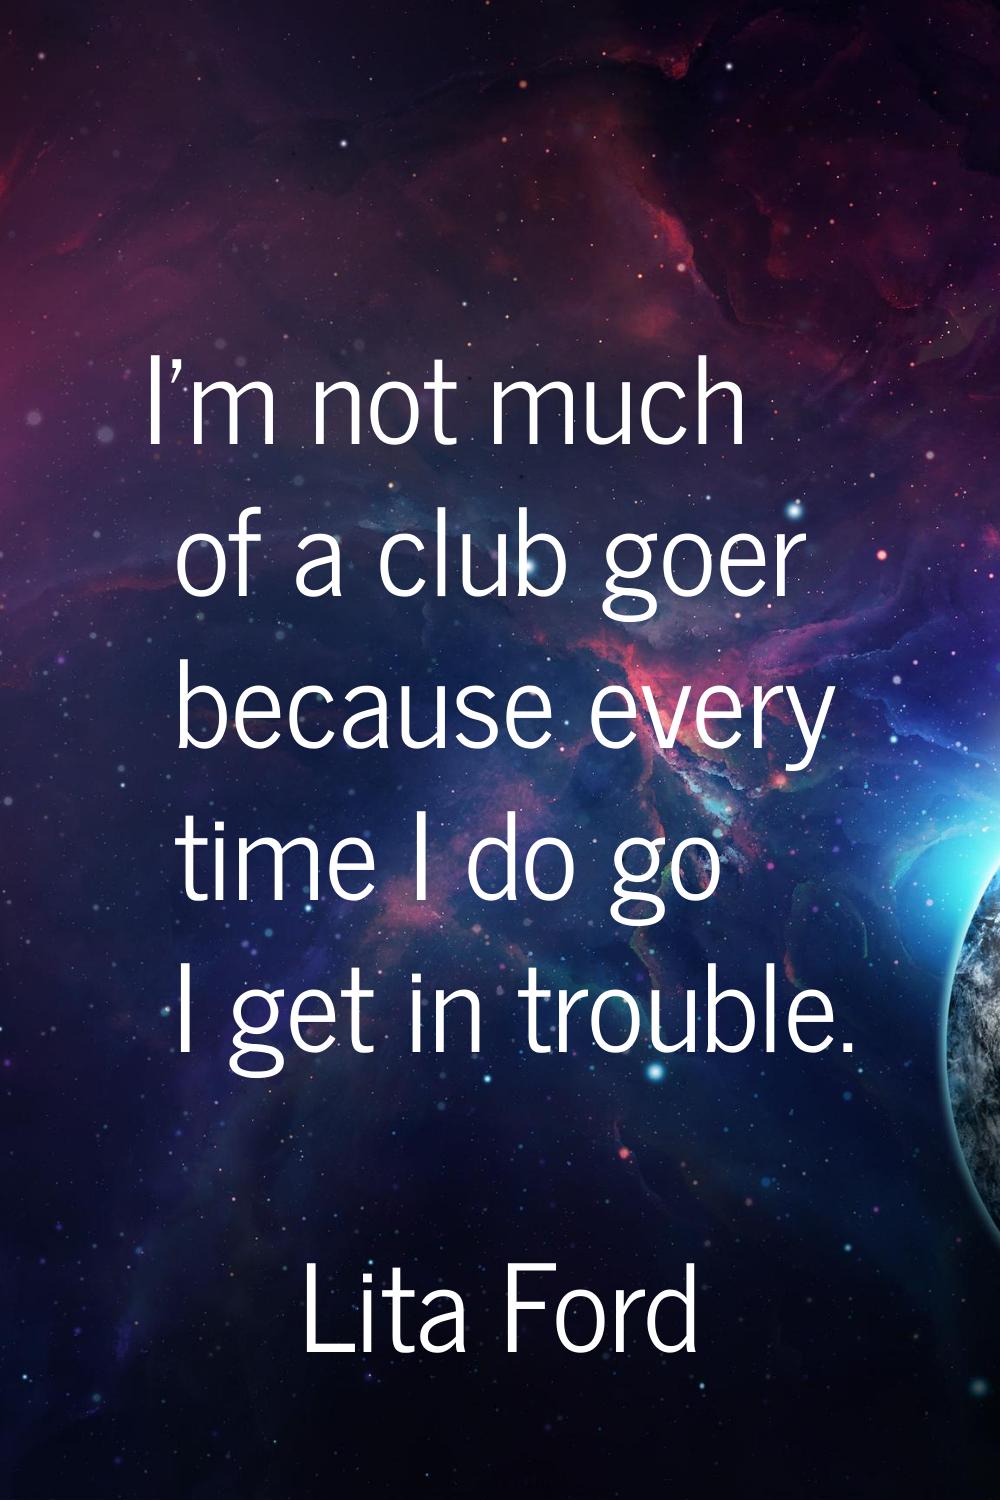 I'm not much of a club goer because every time I do go I get in trouble.